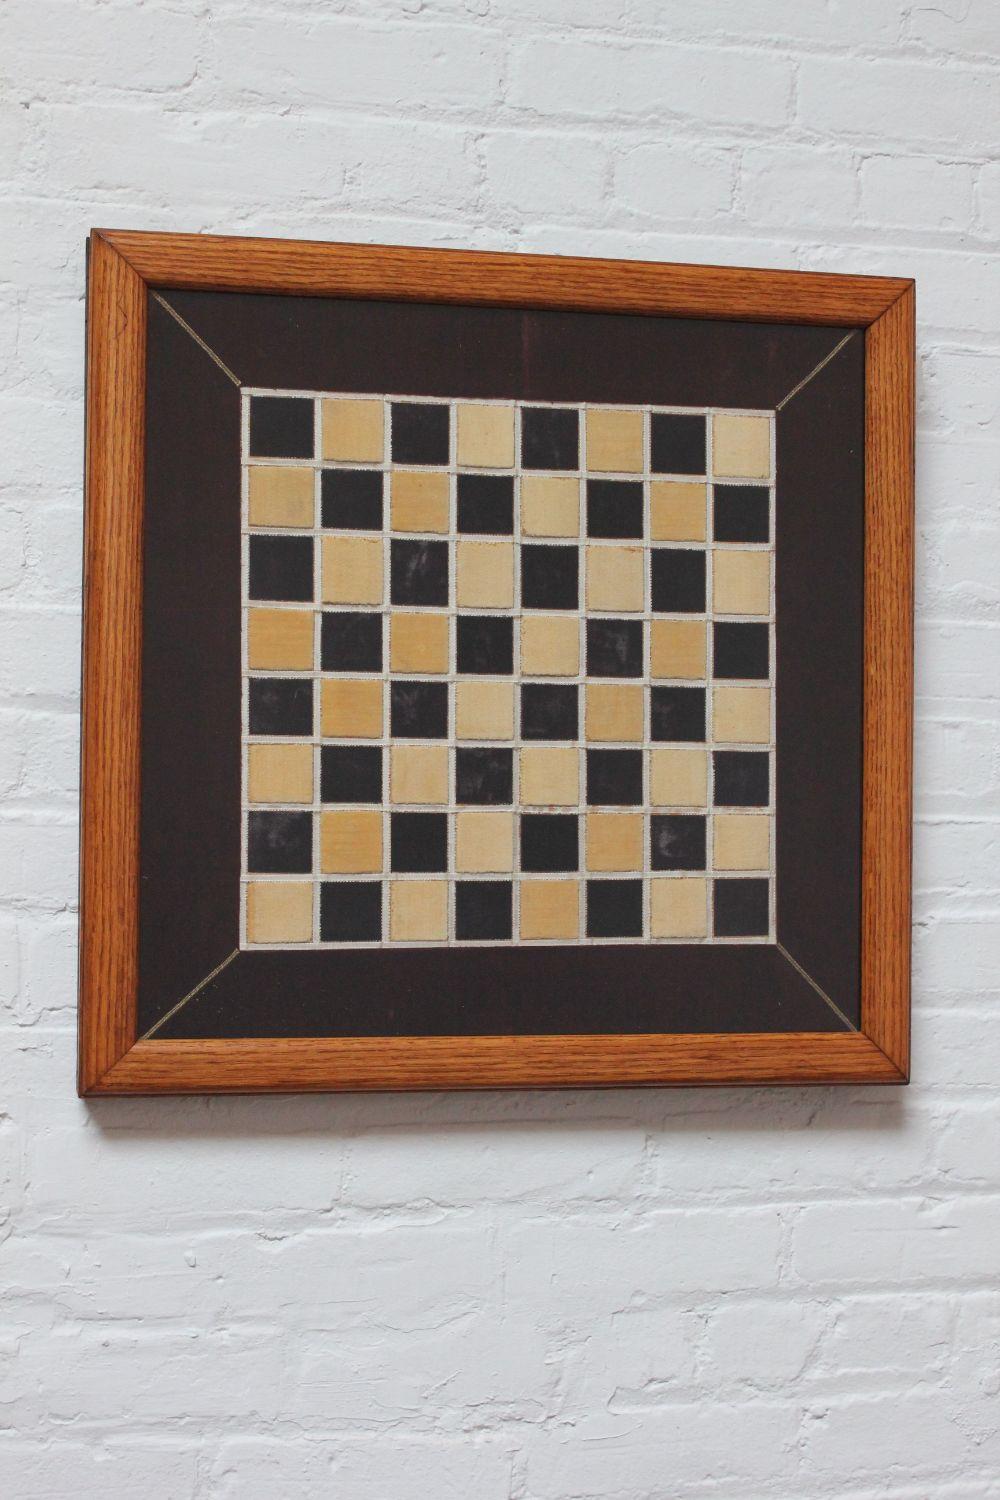 Unique Folk Art chess / checker board composed of a handmade, burgundy velvet quilt with beige, white and gold stitched accents, all housed within a glass-fronted oak frame (ca. 1910-1920, USA).
There are scuffs present to the glass, as shown;